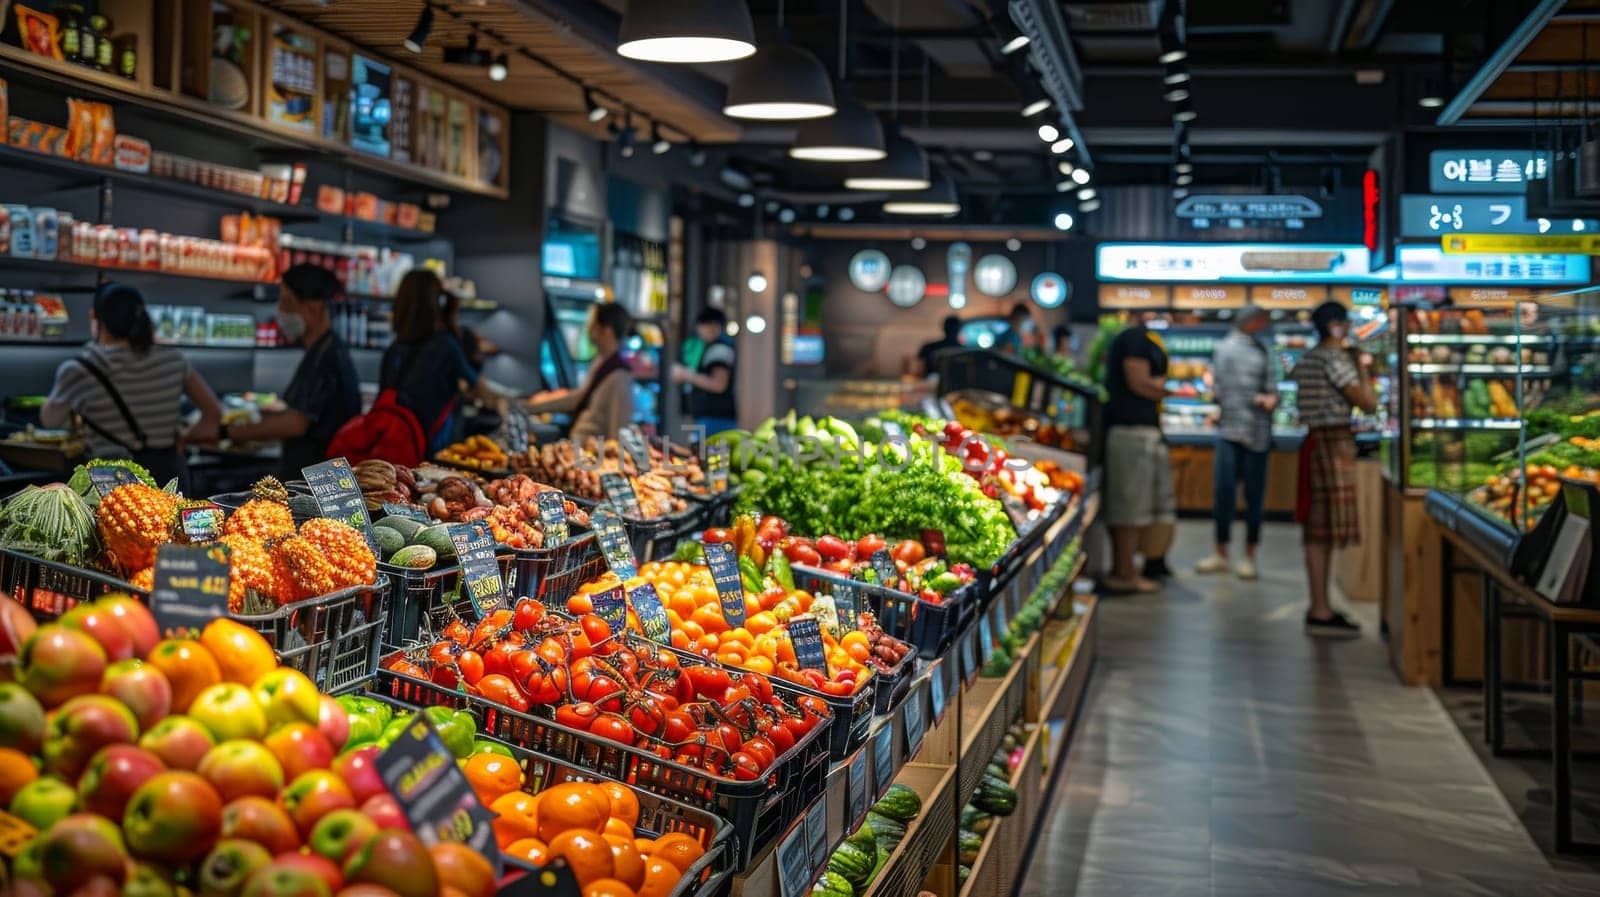 A busy grocery store with people shopping for produce. The atmosphere is lively and bustling. There are many different types of fruits and vegetables on display, including apples, oranges